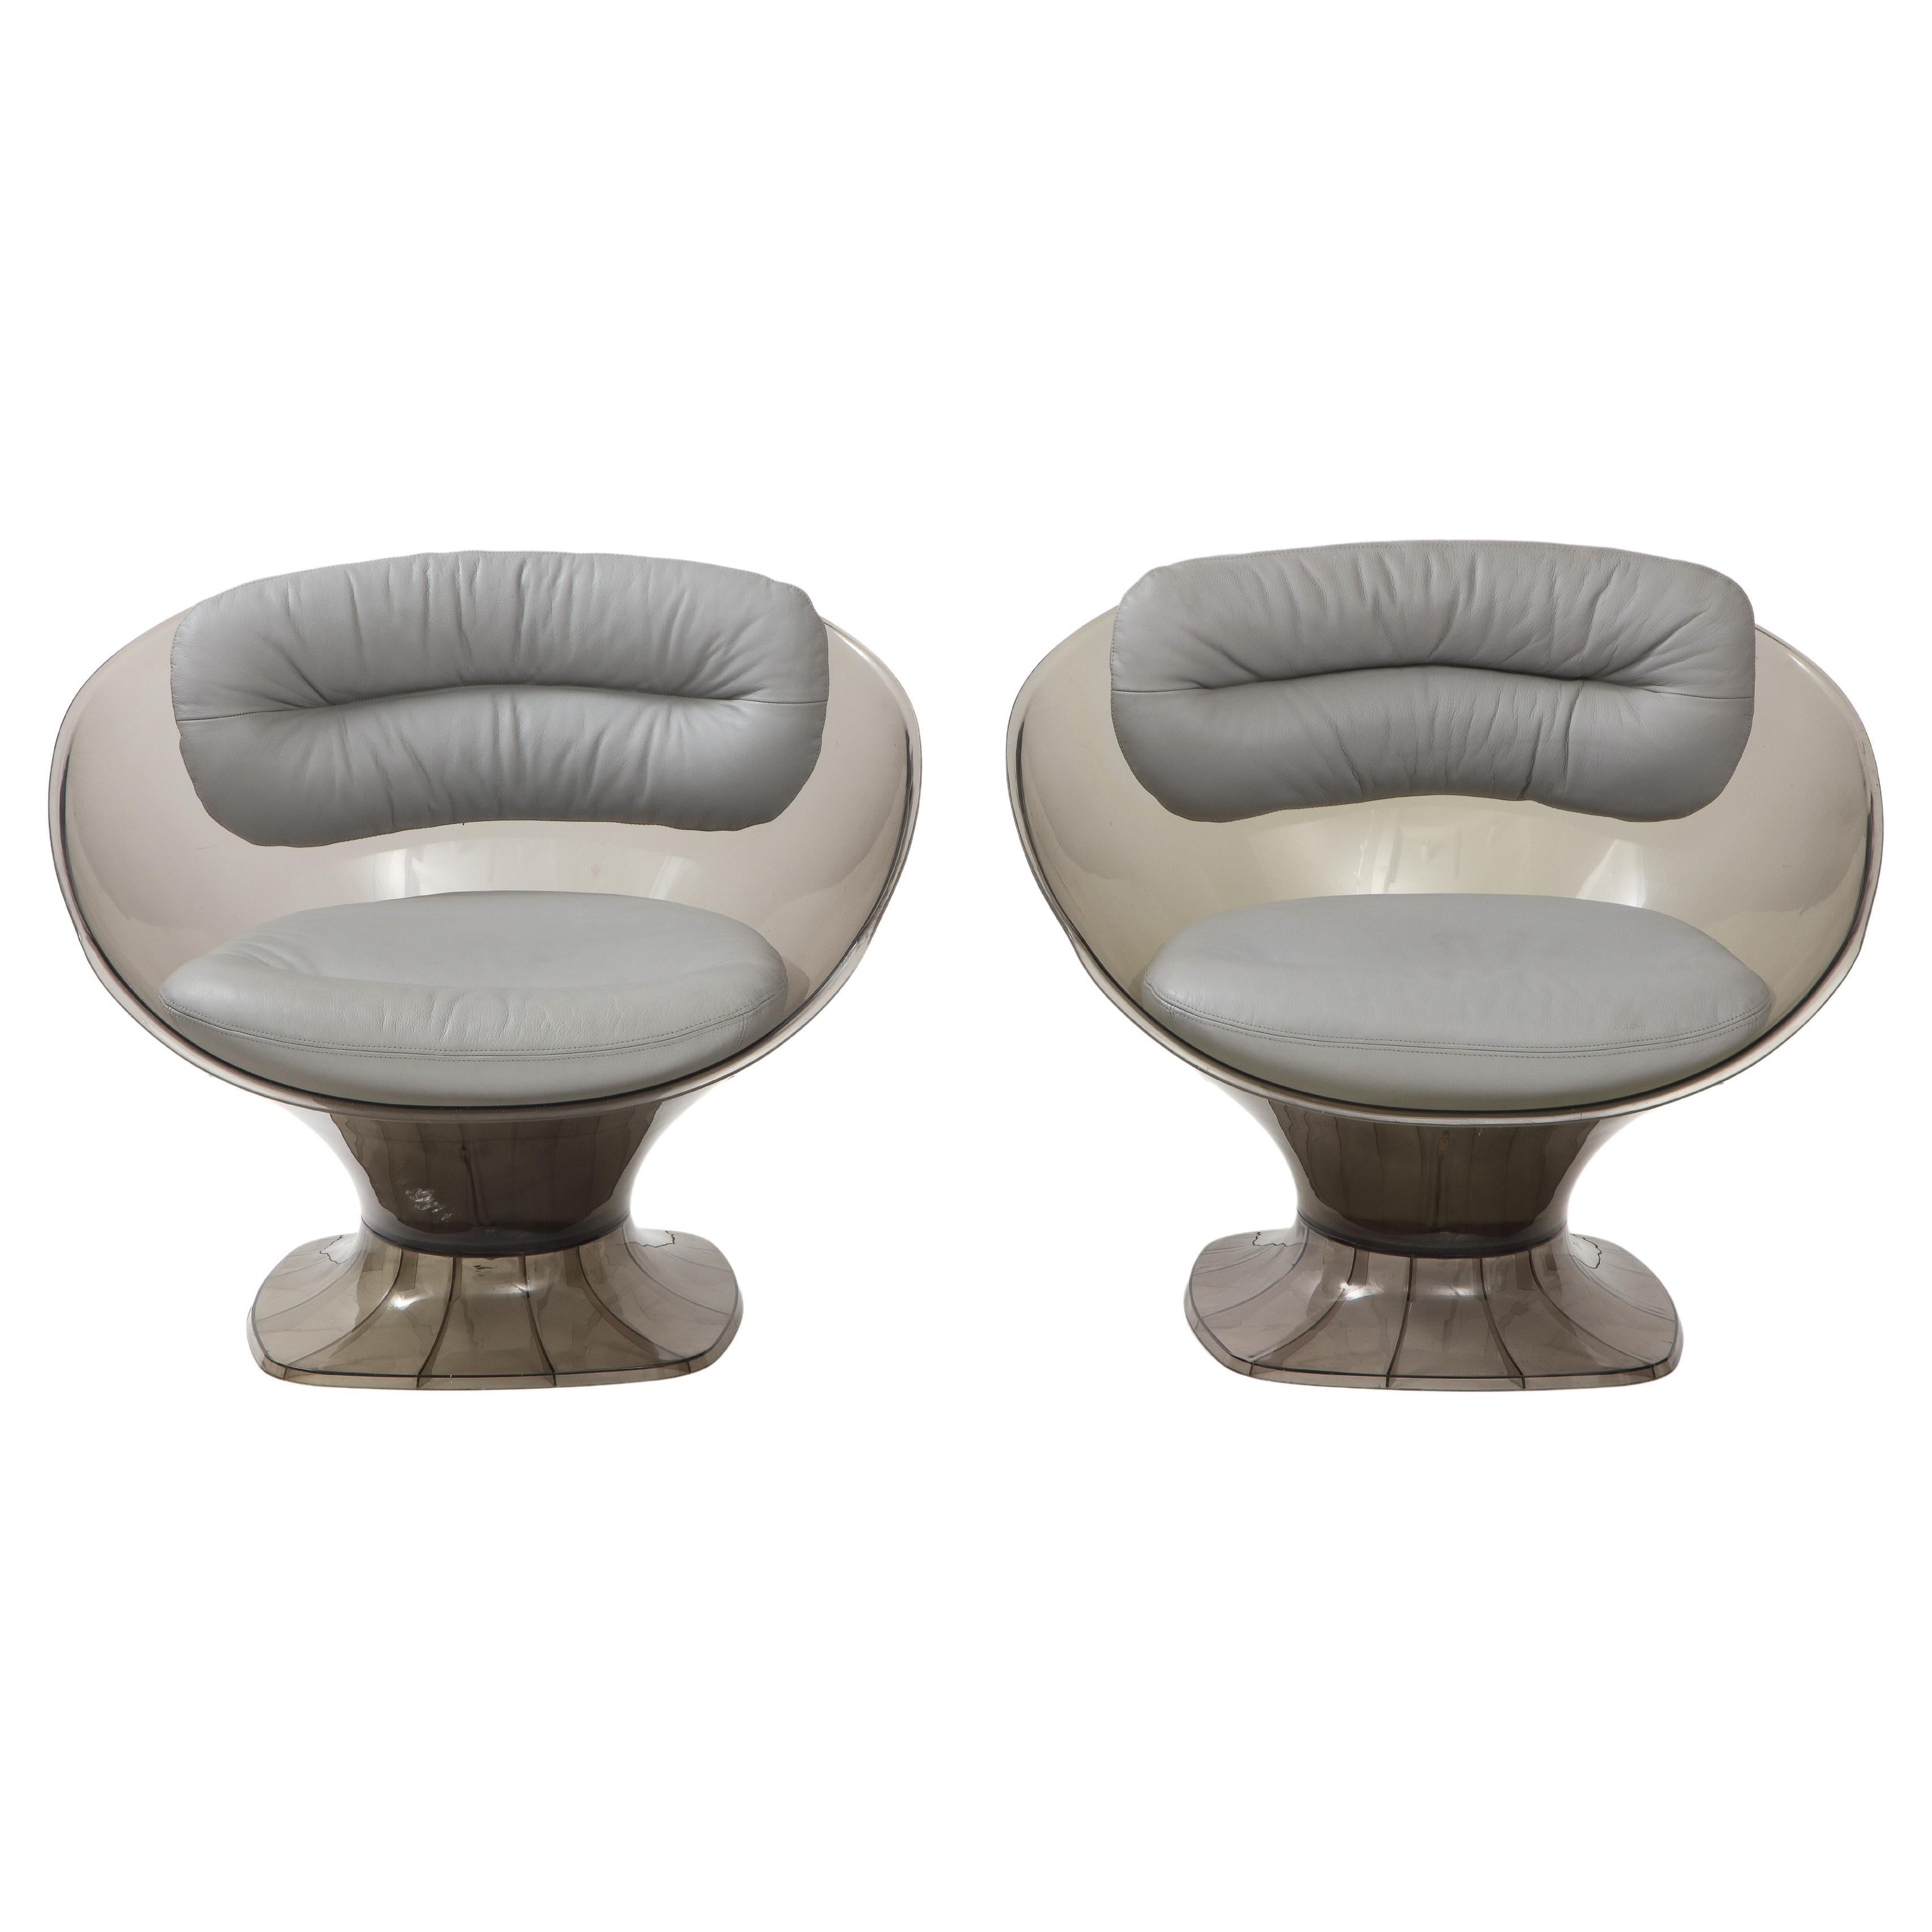 Raphael France Acrylic Lounge Chairs For Sale